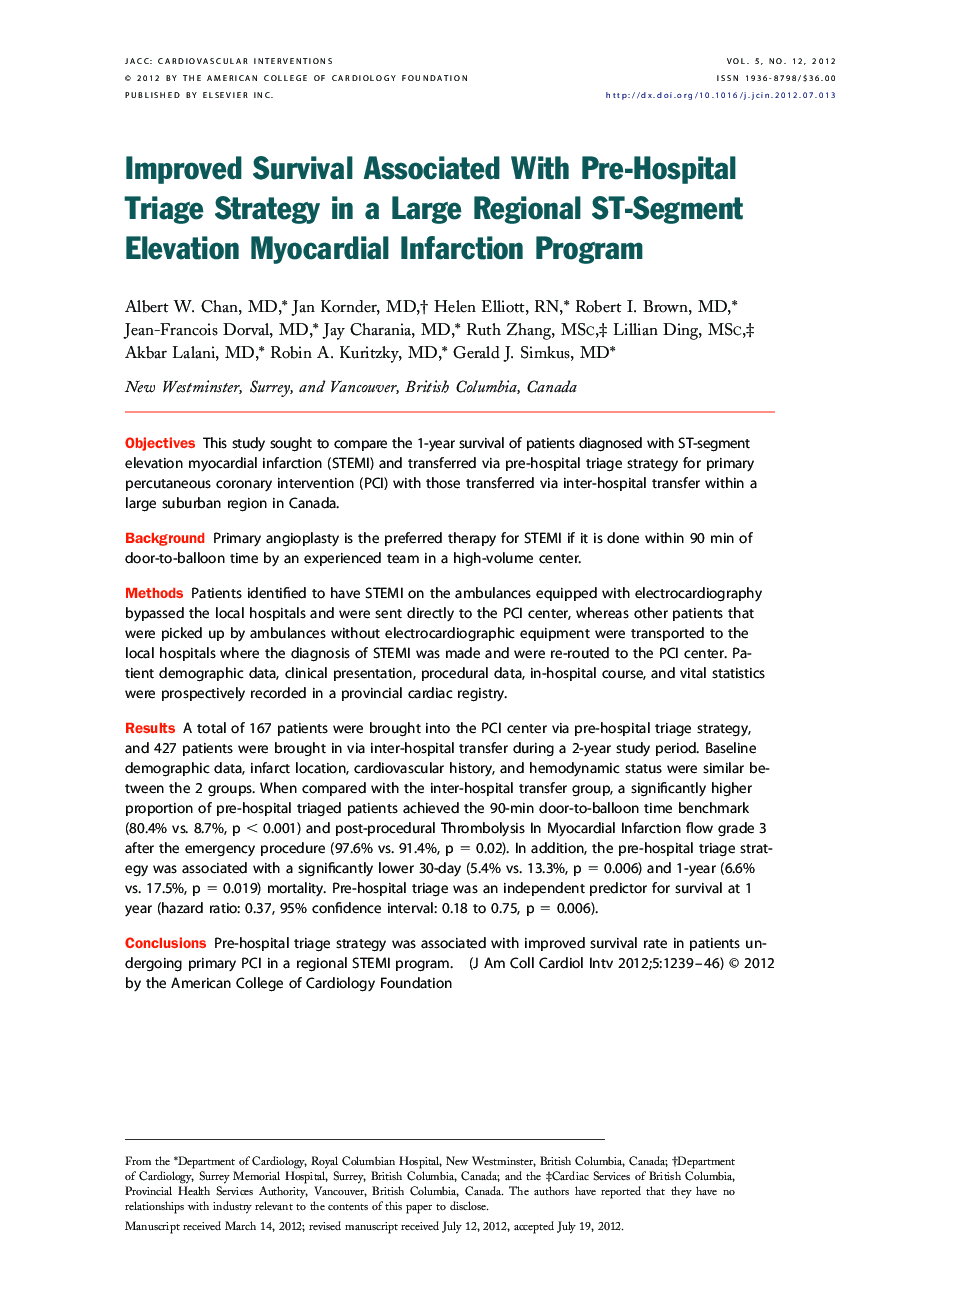 Improved Survival Associated With Pre-Hospital Triage Strategy in a Large Regional ST-Segment Elevation Myocardial Infarction Program 